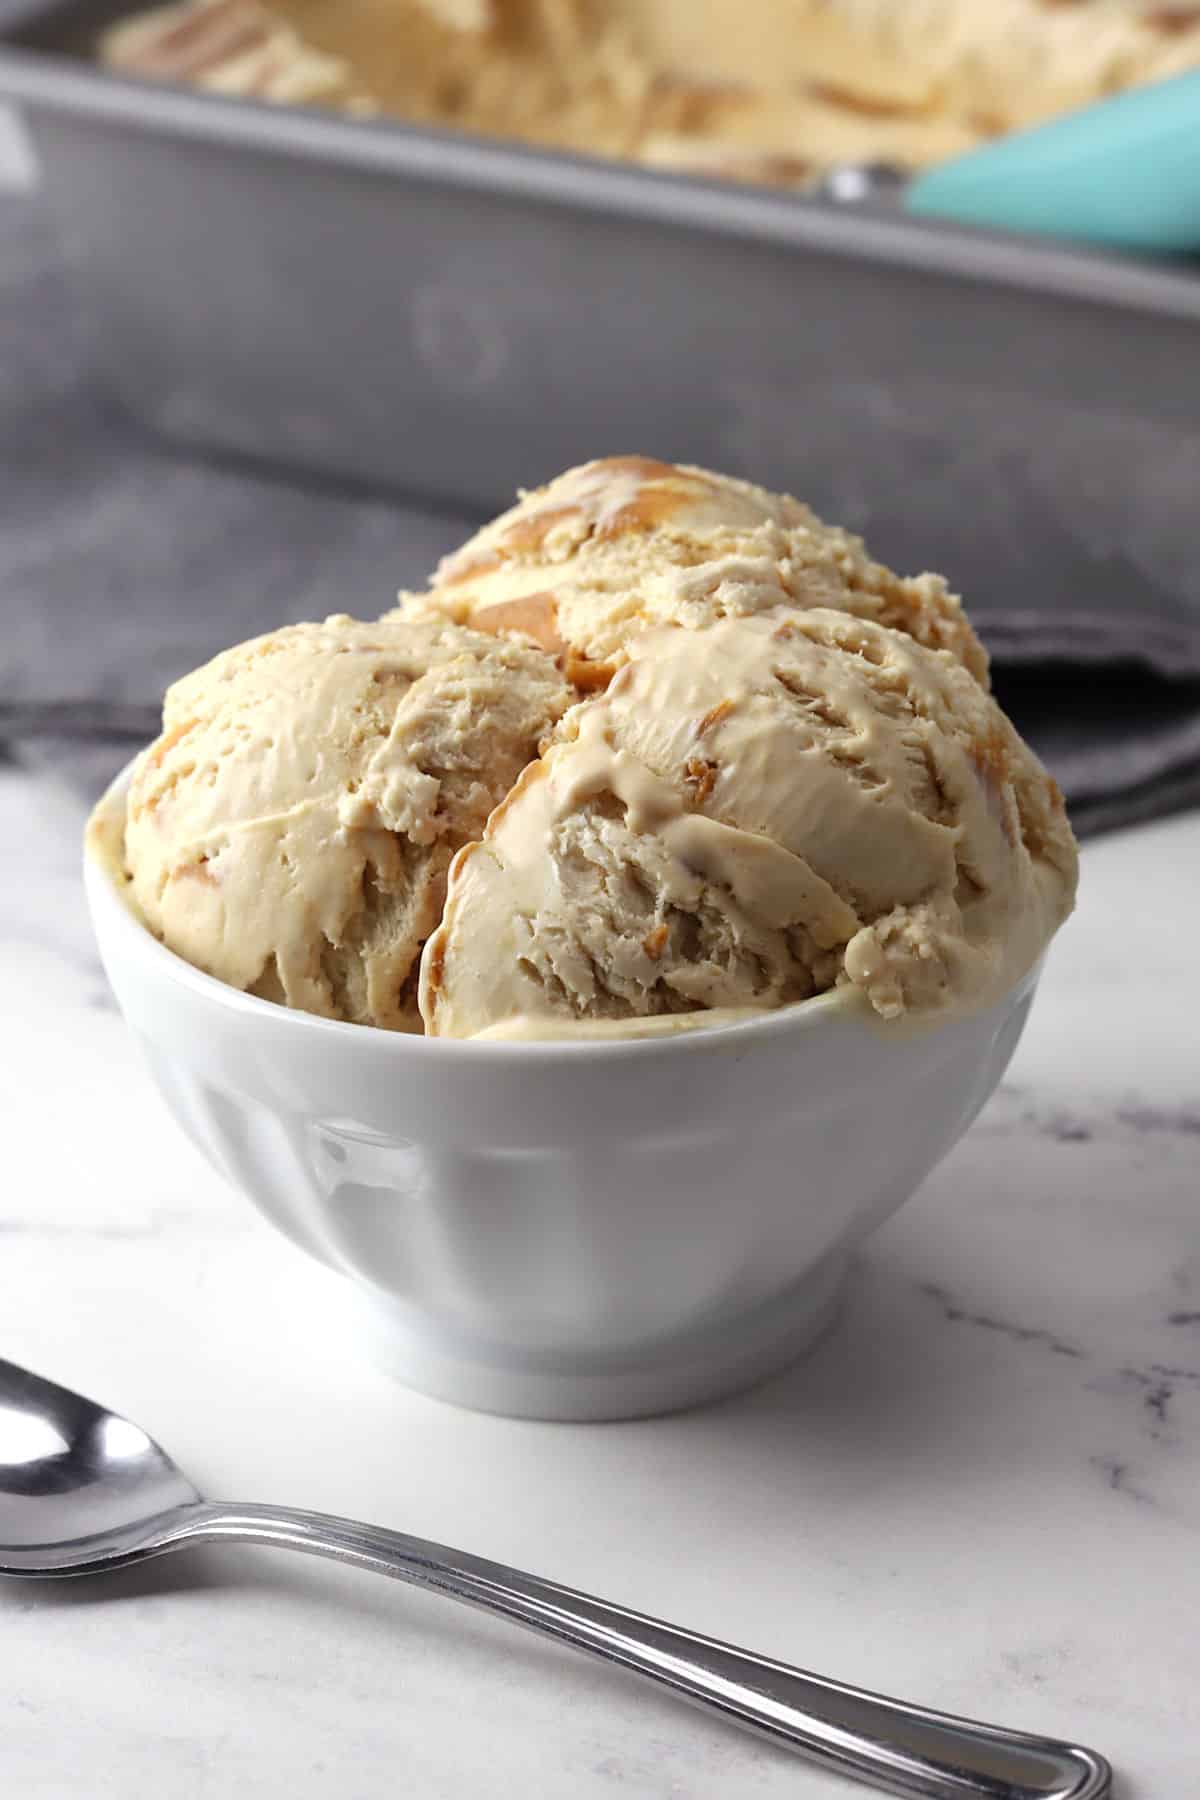 A white serving bowl filled with scoops of peanut butter ice cream.